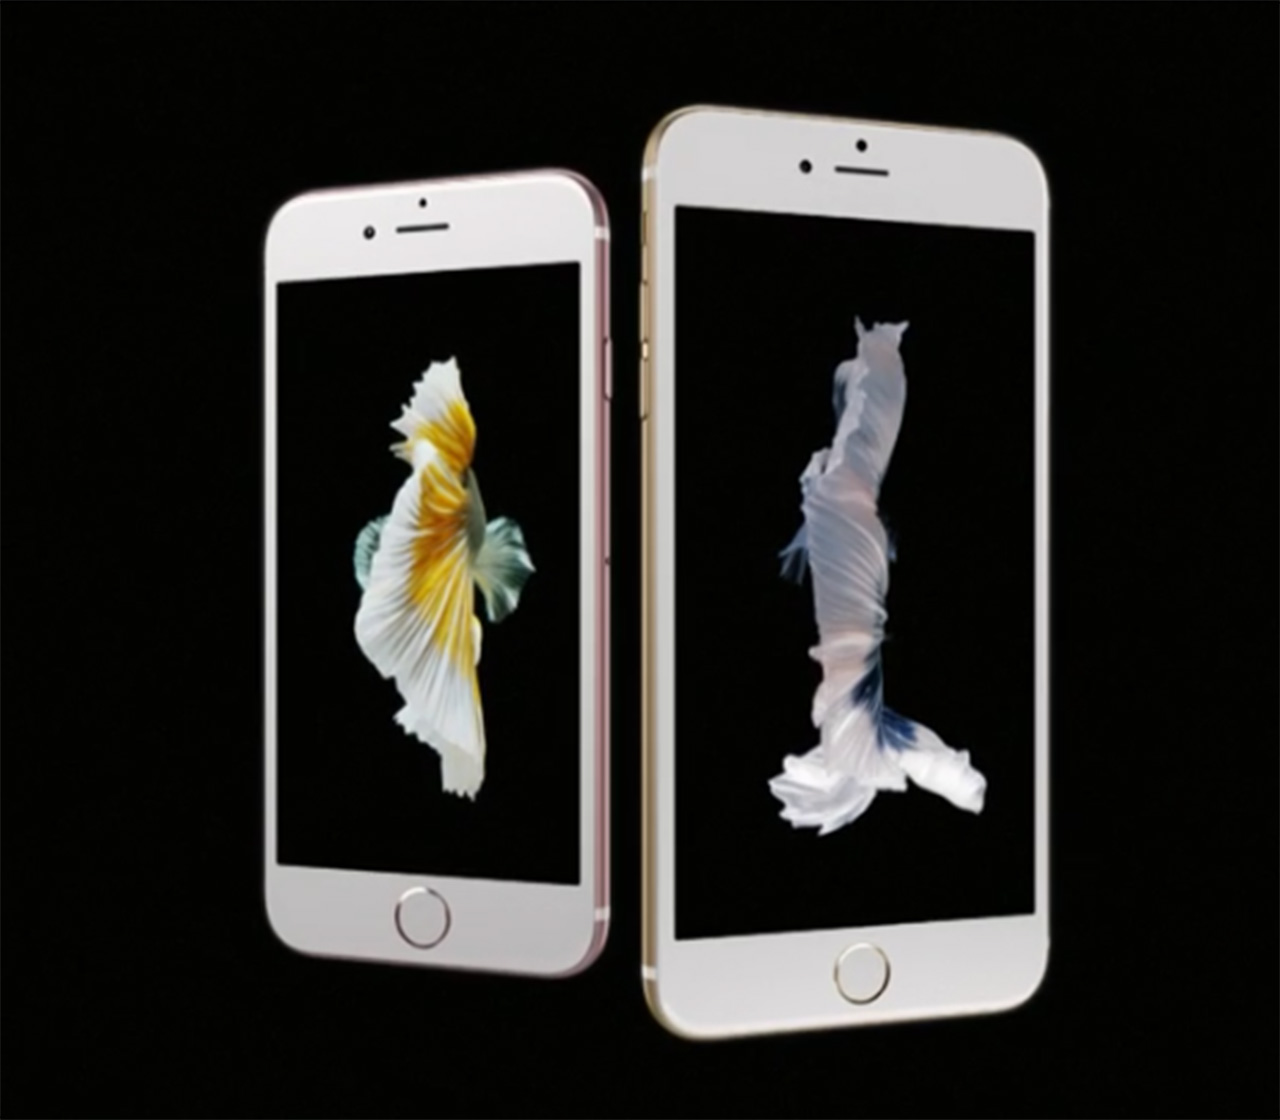 At the outset, Apple's iPhone 6s and 6s Plus is very similar to the iPhone 6. 